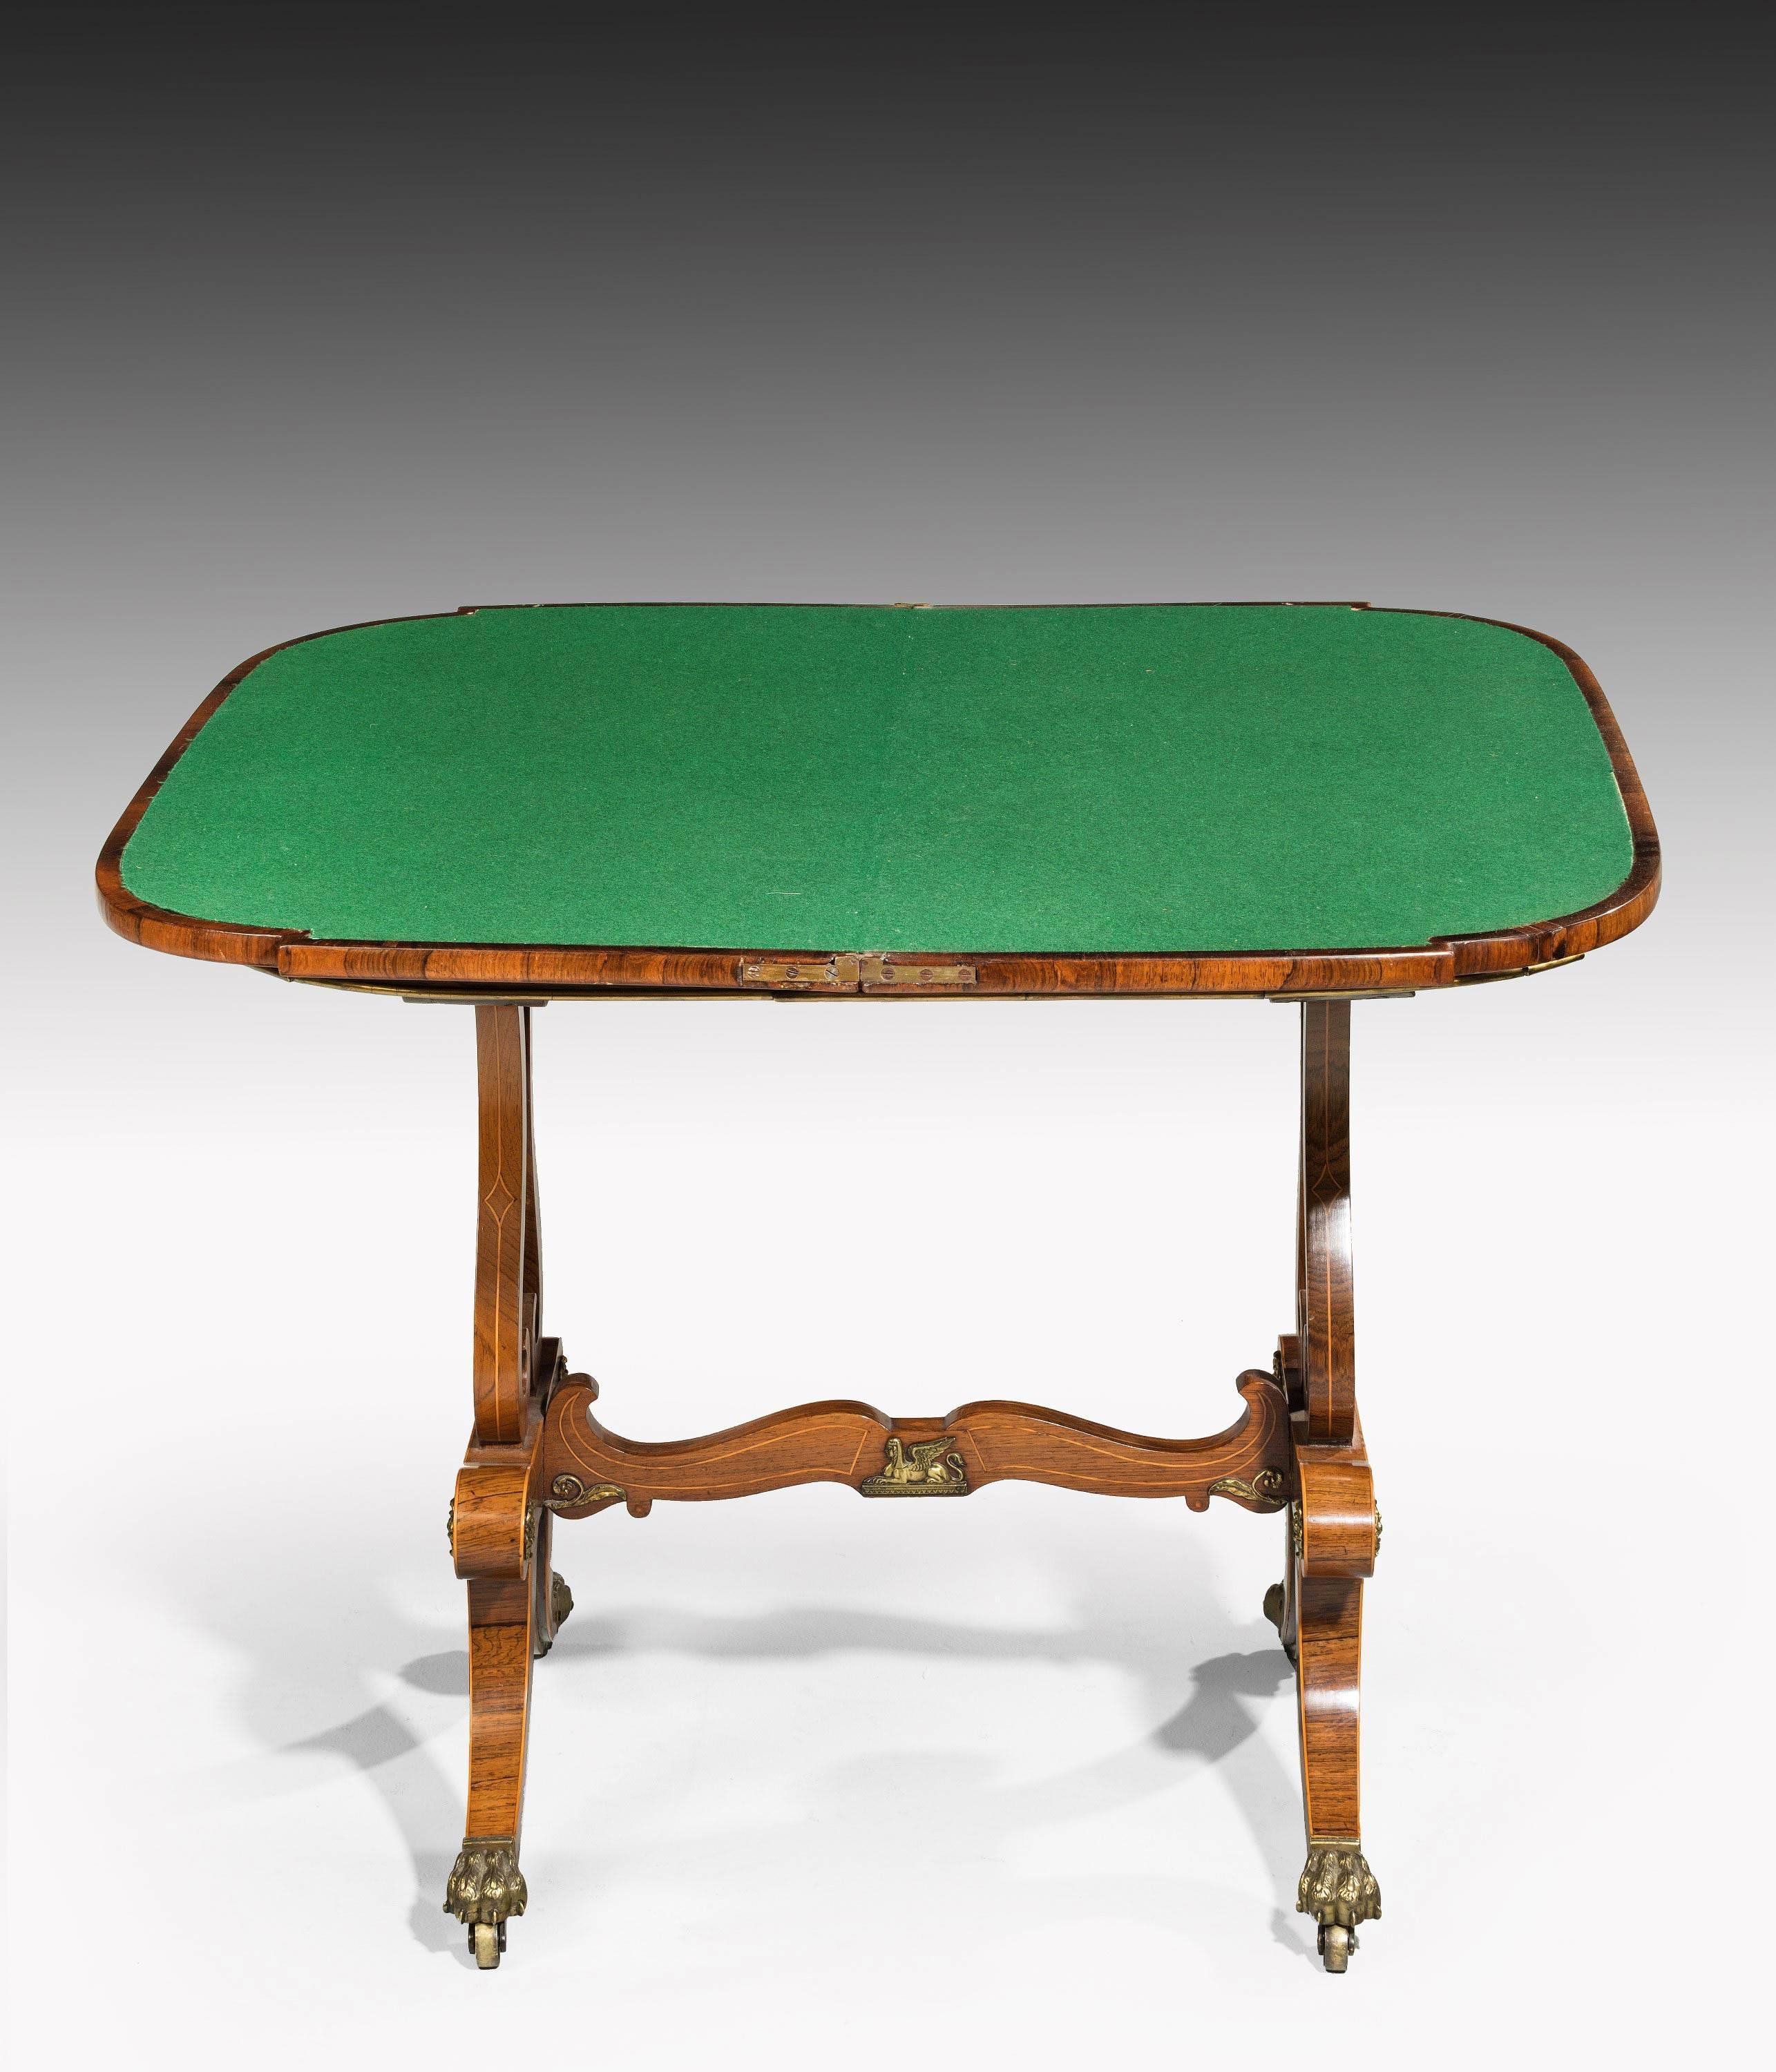 Early 19th Century Exceptional Regency Period Rosewood Card Table